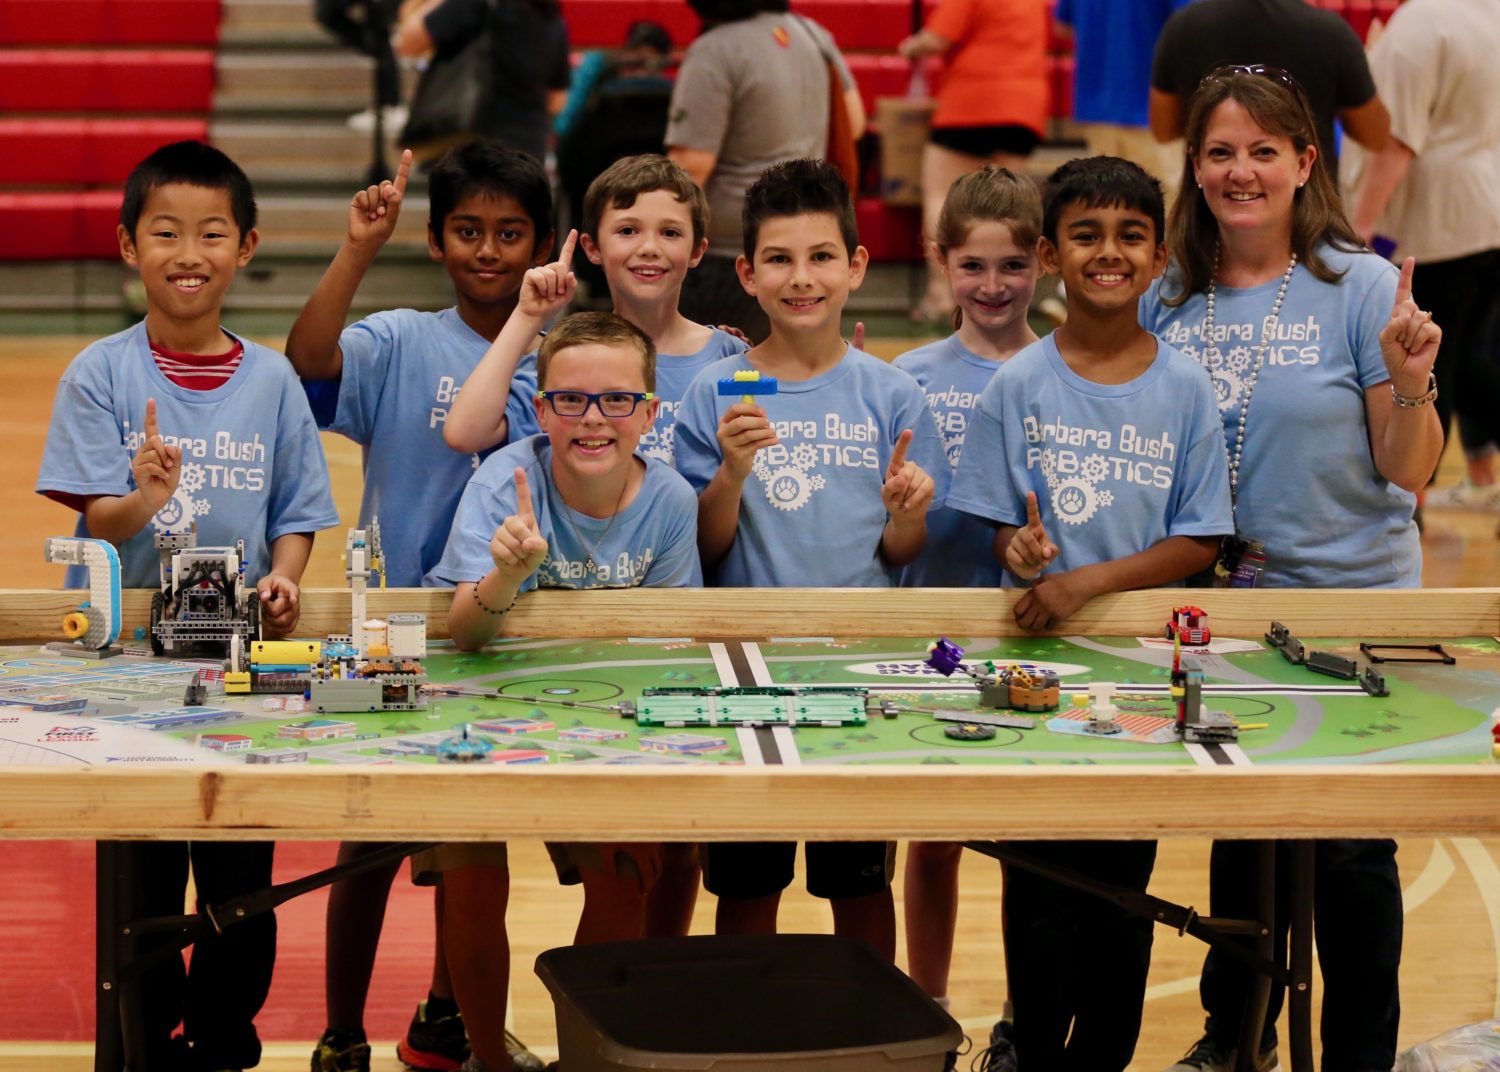 "the robotics team poses for a picture after their competition"